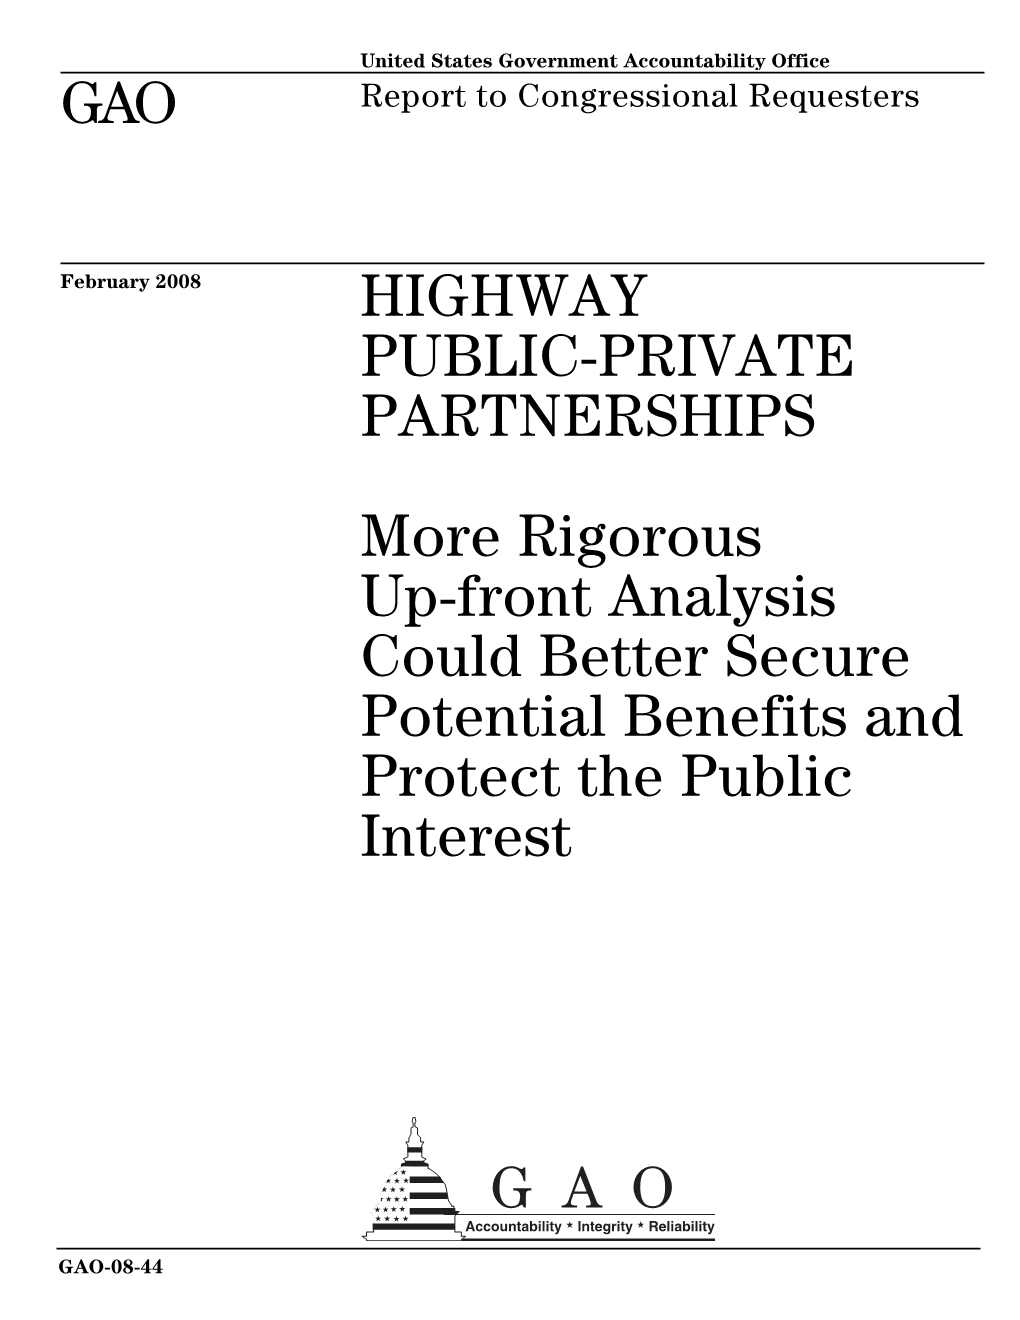 GAO-08-44 Highway Public-Private Partnerships: More Rigorous Up